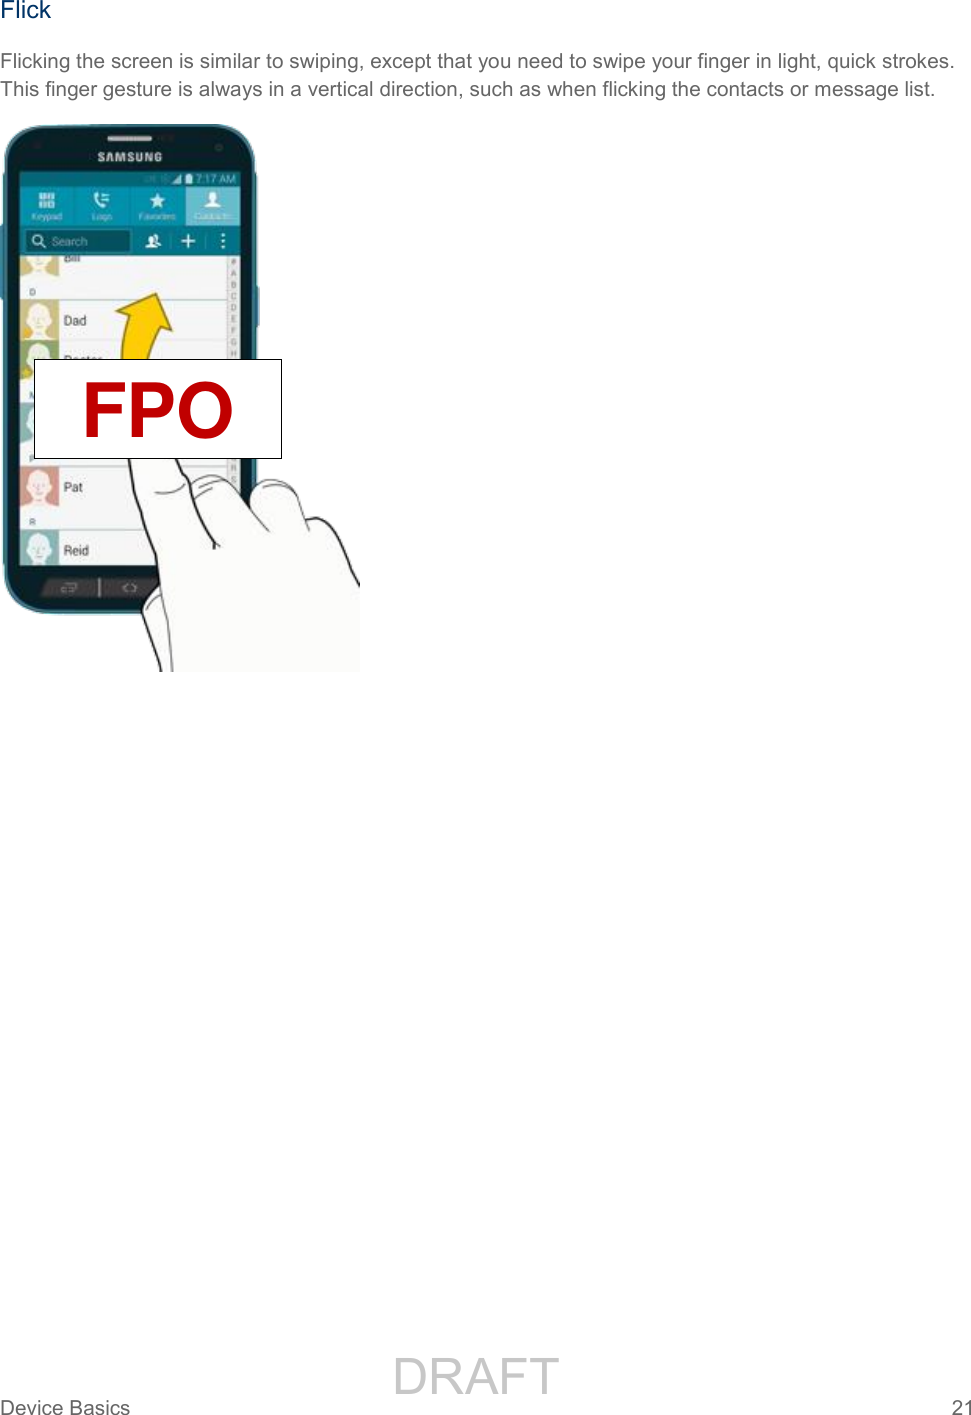                 DRAFT FOR INTERNAL USE ONLYDevice Basics  21   Flick Flicking the screen is similar to swiping, except that you need to swipe your finger in light, quick strokes. This finger gesture is always in a vertical direction, such as when flicking the contacts or message list.  FPO 